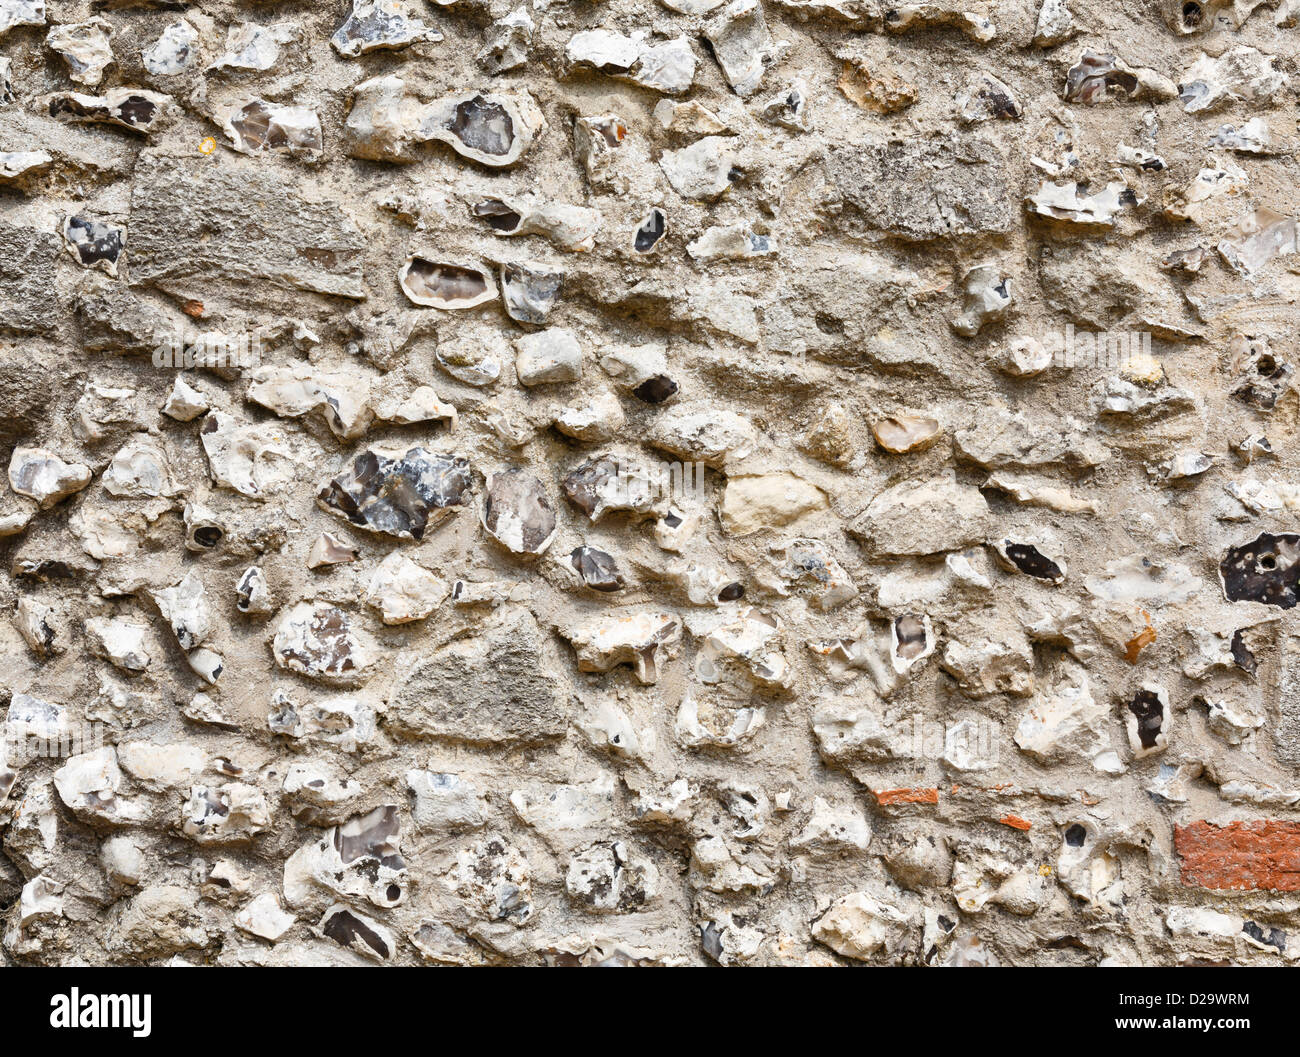 Closeup of an ancient flint and stonework castle wall Stock Photo